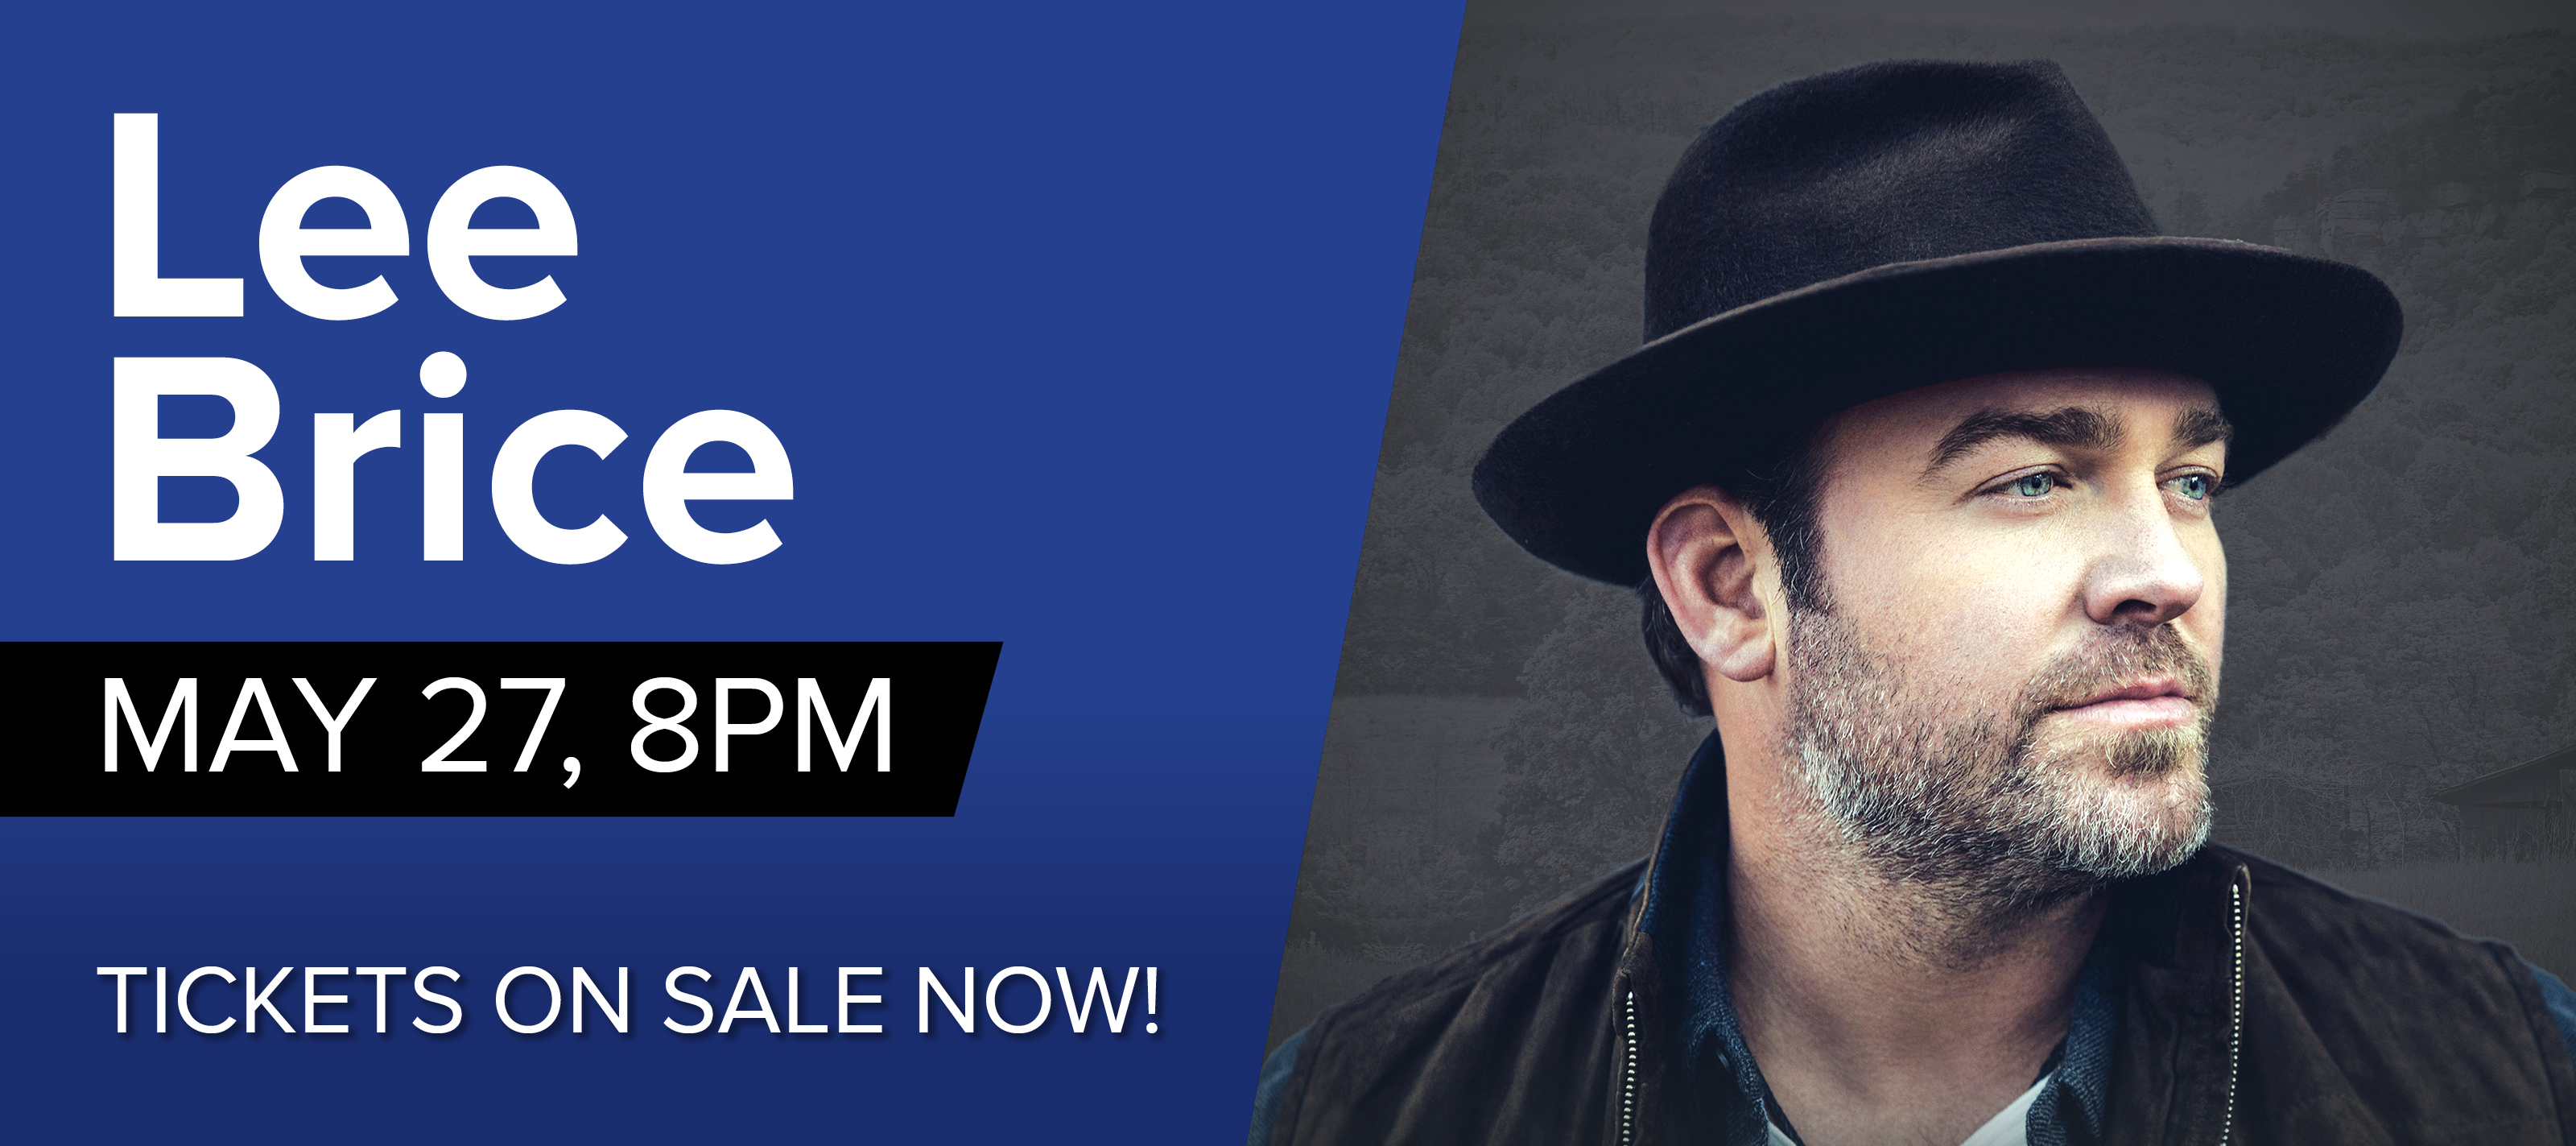 Lee Brice May 27 at 8pm. Tickets on sale now